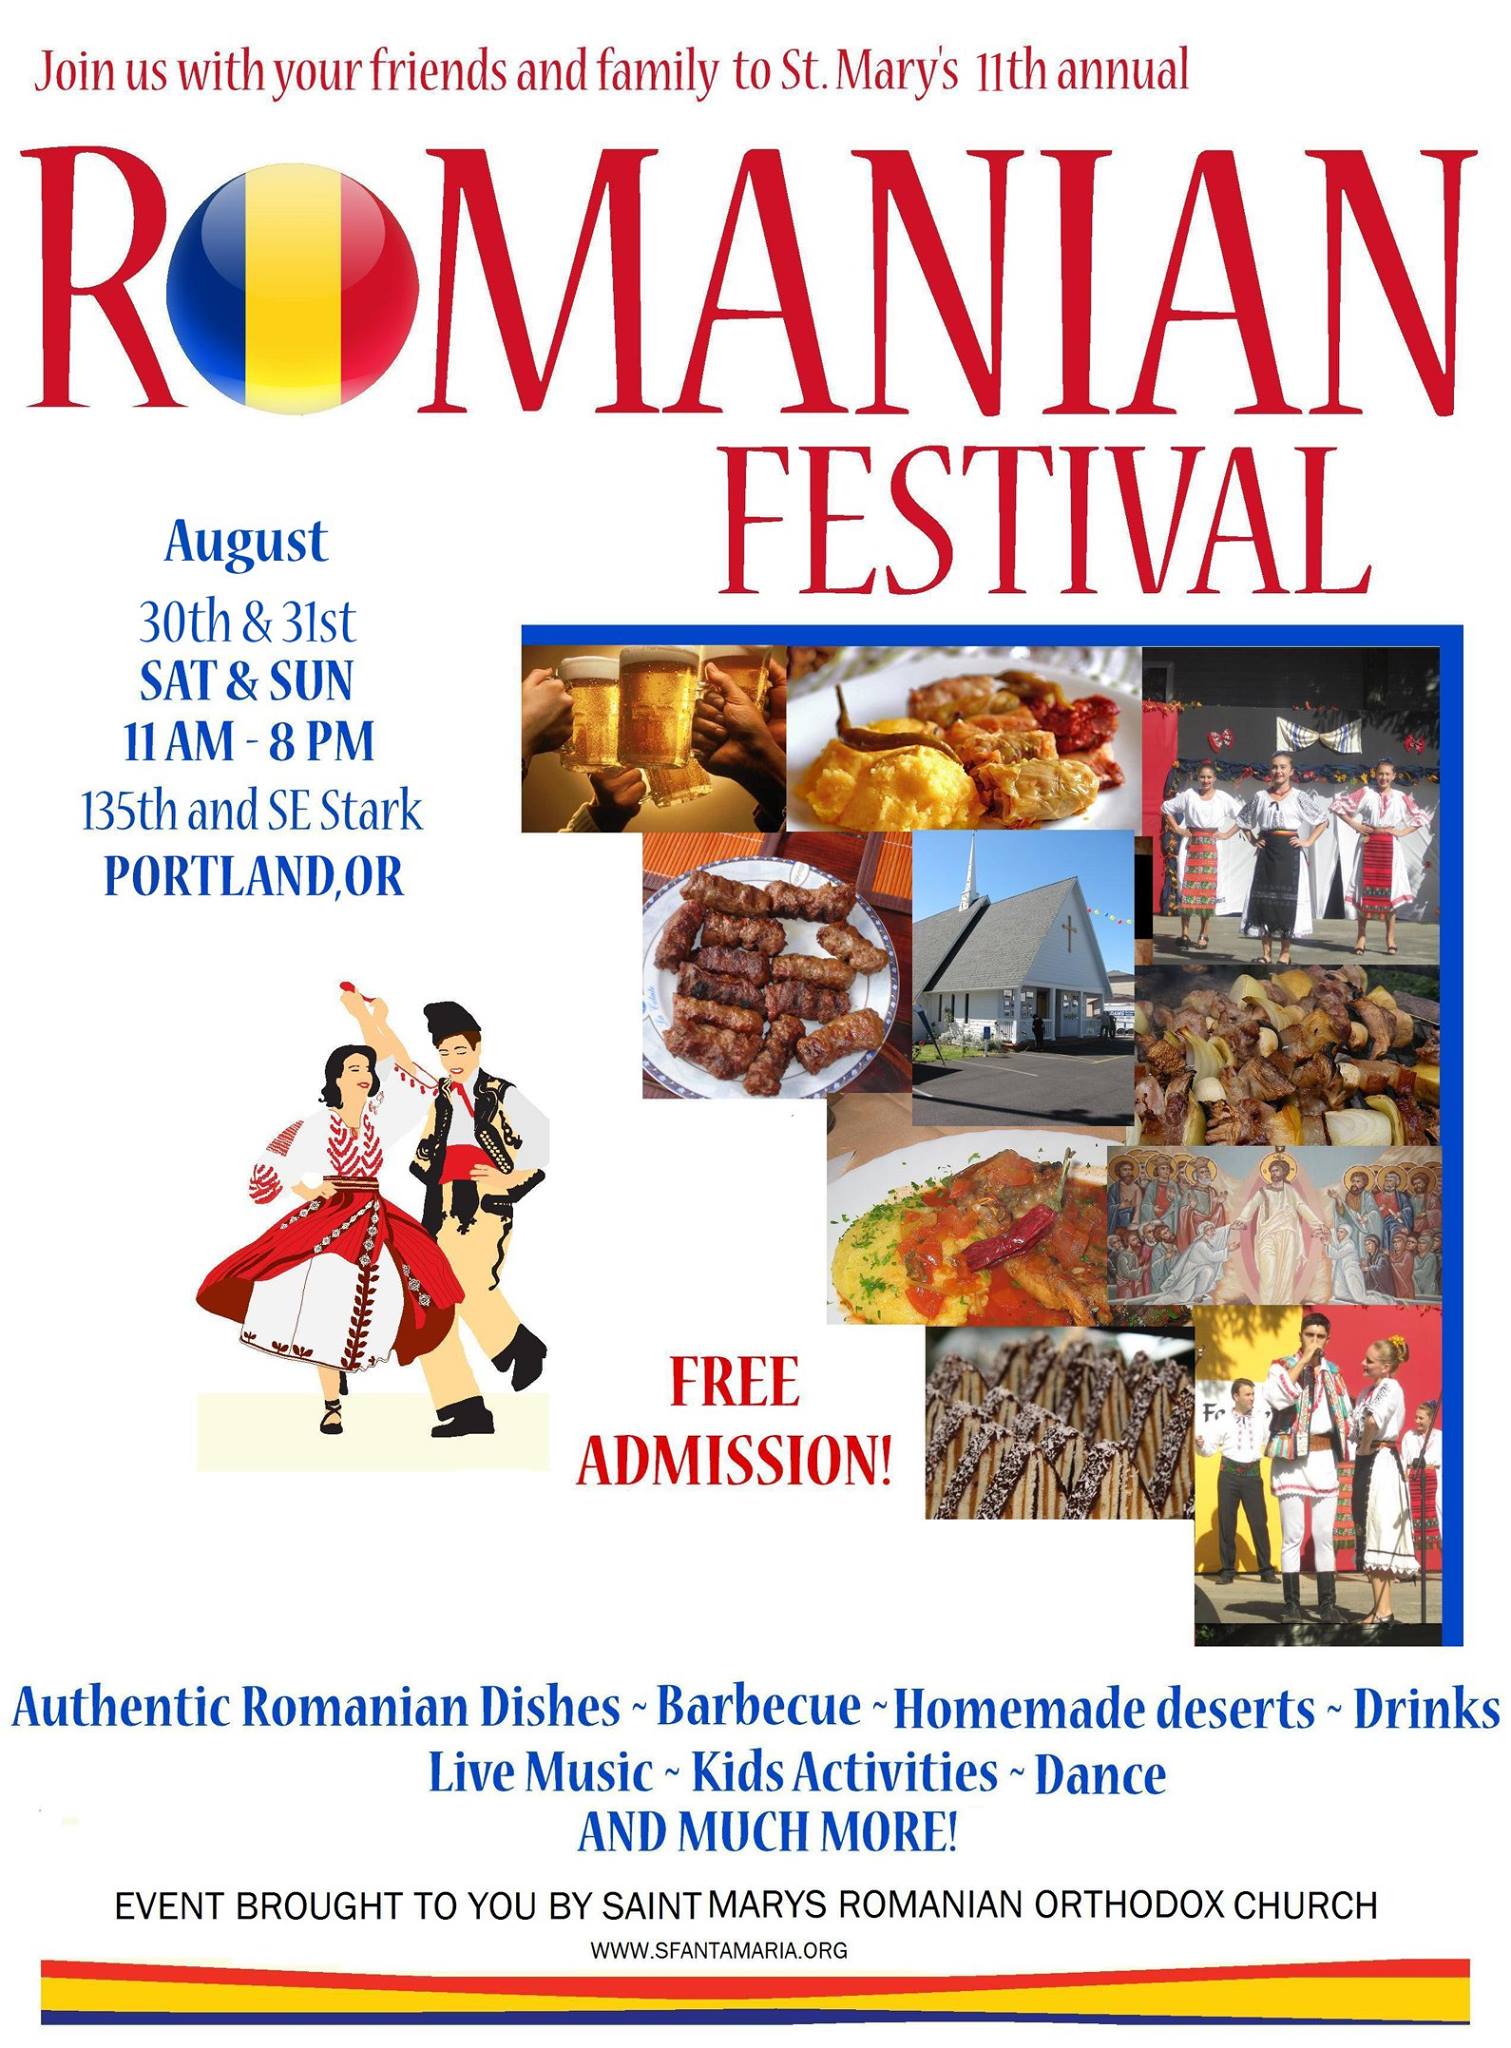 St. Mary’s 11th annual Romanian Festival, August 30-31, 2014 | Orthodox